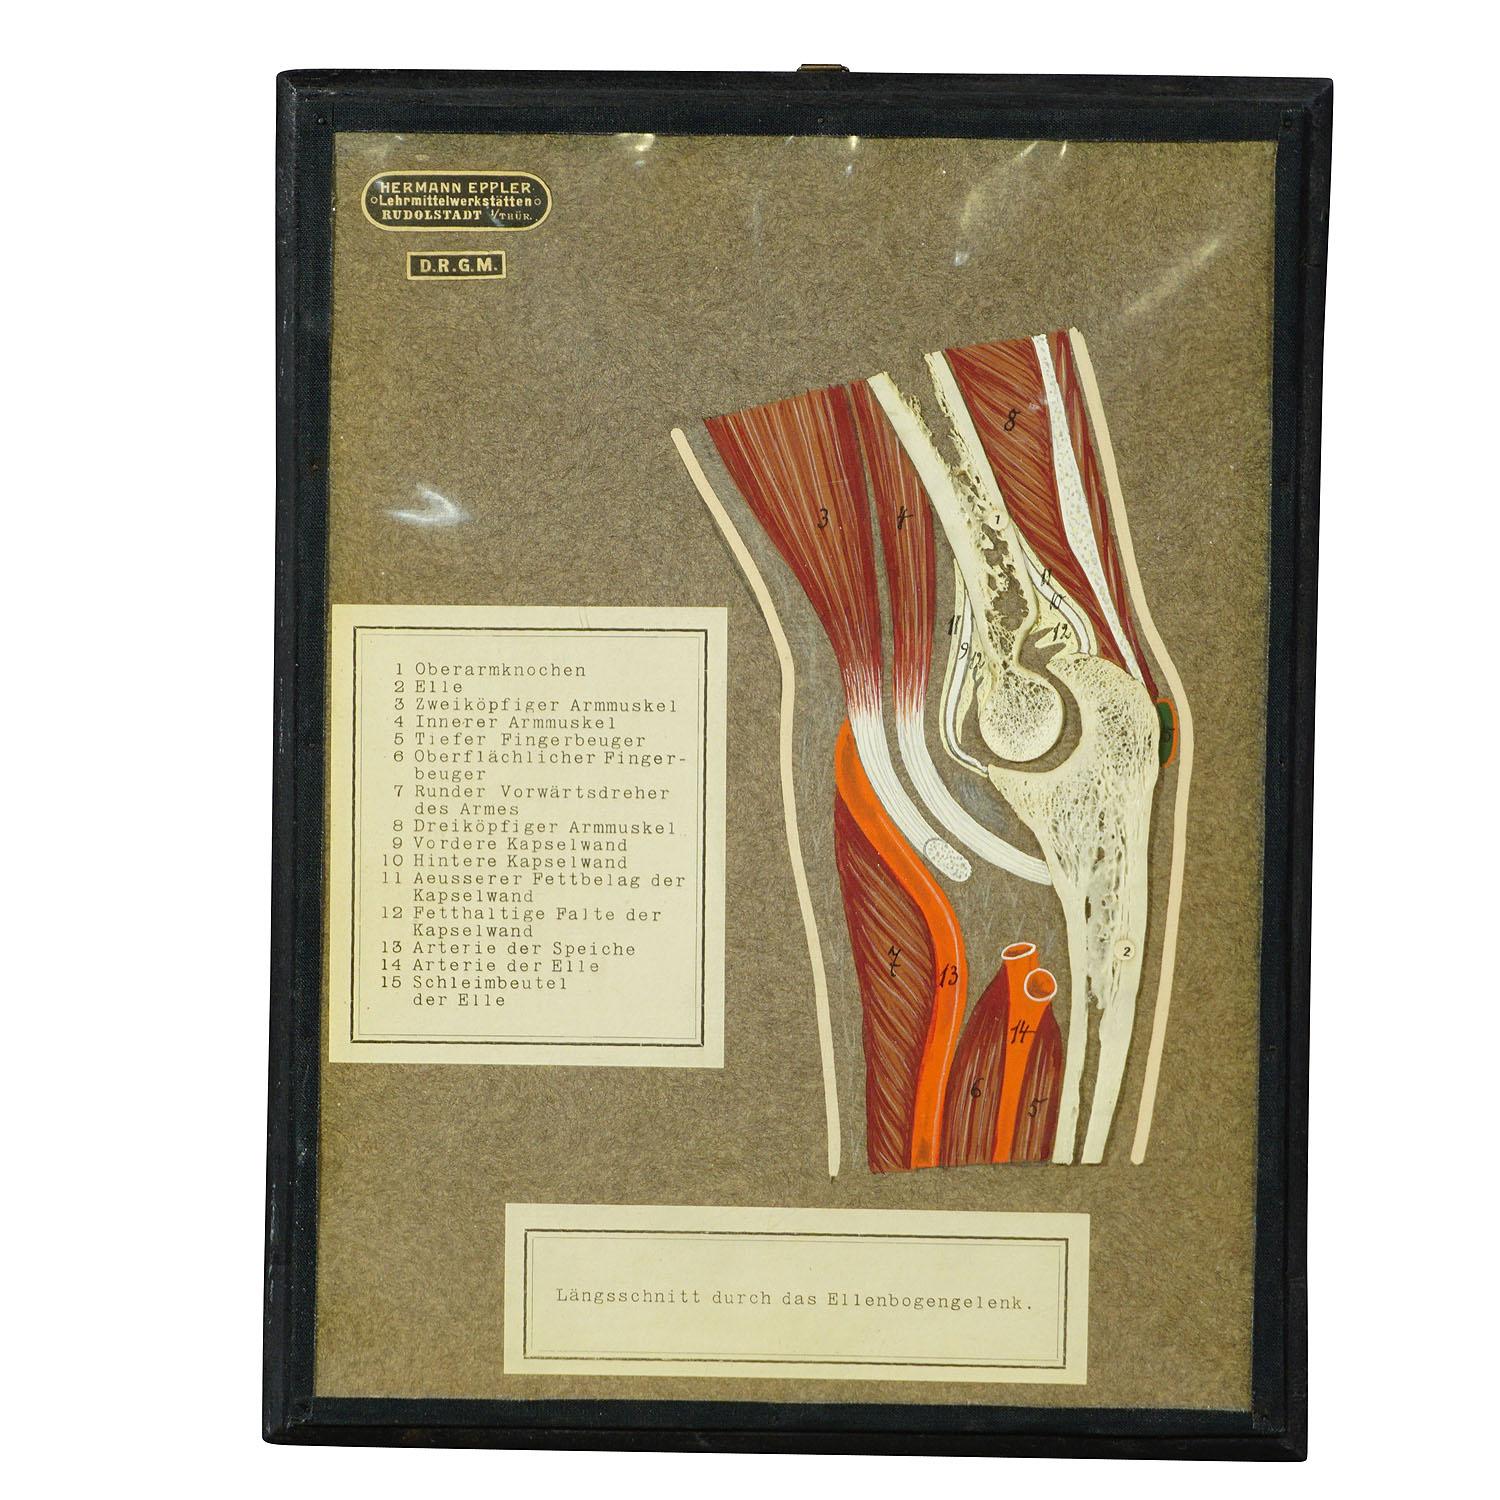 An antique visual aid of a longitudinal bone cut of the elbow. Genuine bone mounted on cardboard with hand-painted structure of muscles, bursae and tendons. With German explanation. Published by Hermann Eppler, Lehrmittelanstalt Rudolstadt ca. 1900.